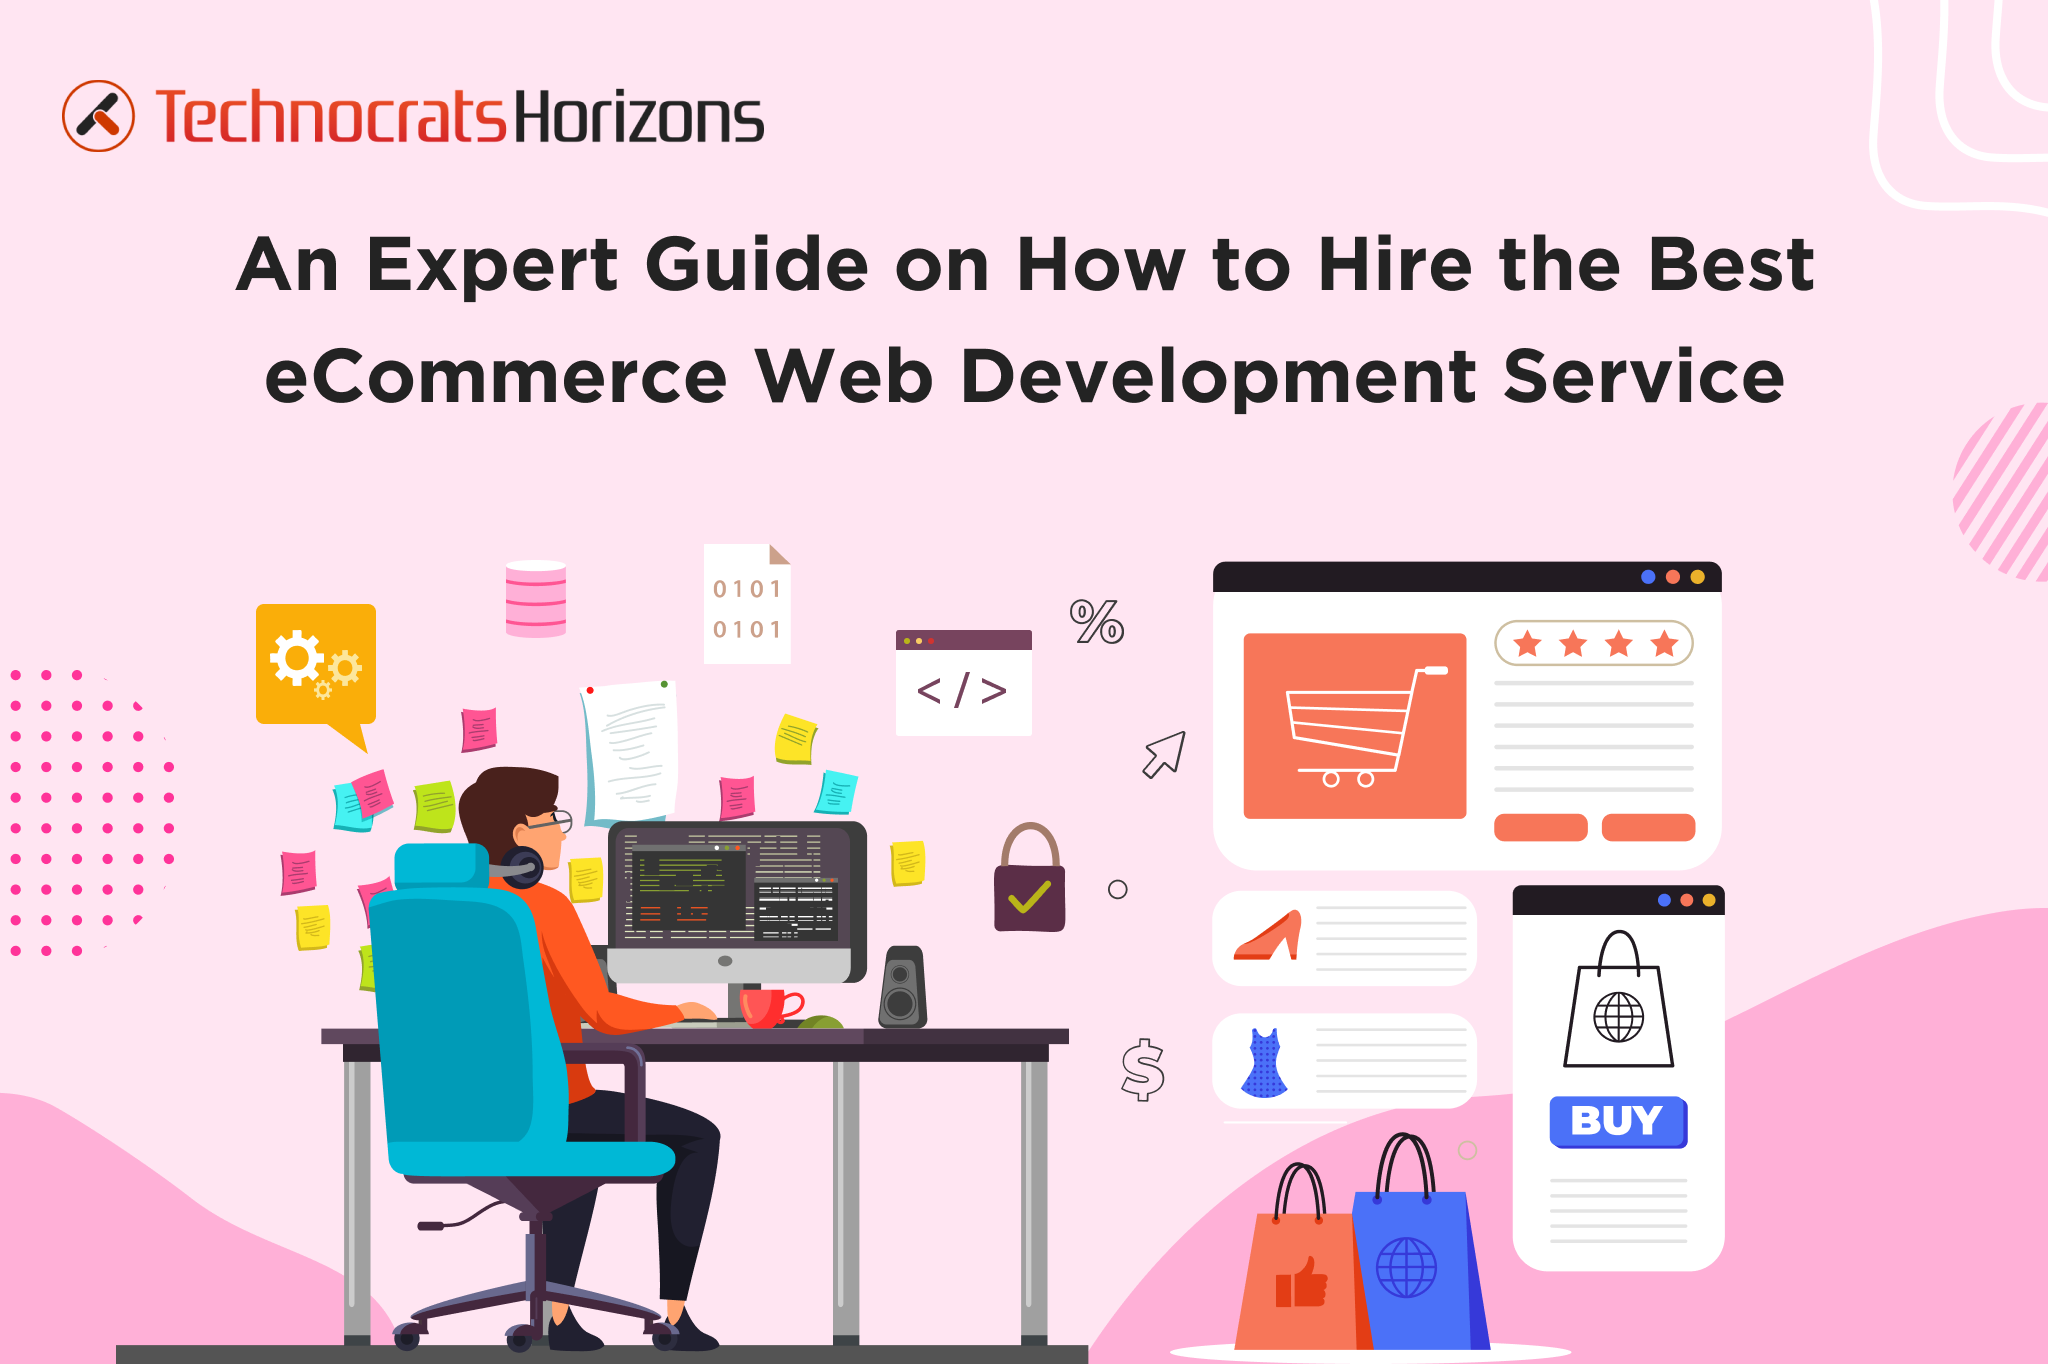 How to Hire Best eCommerce Web Development Service?